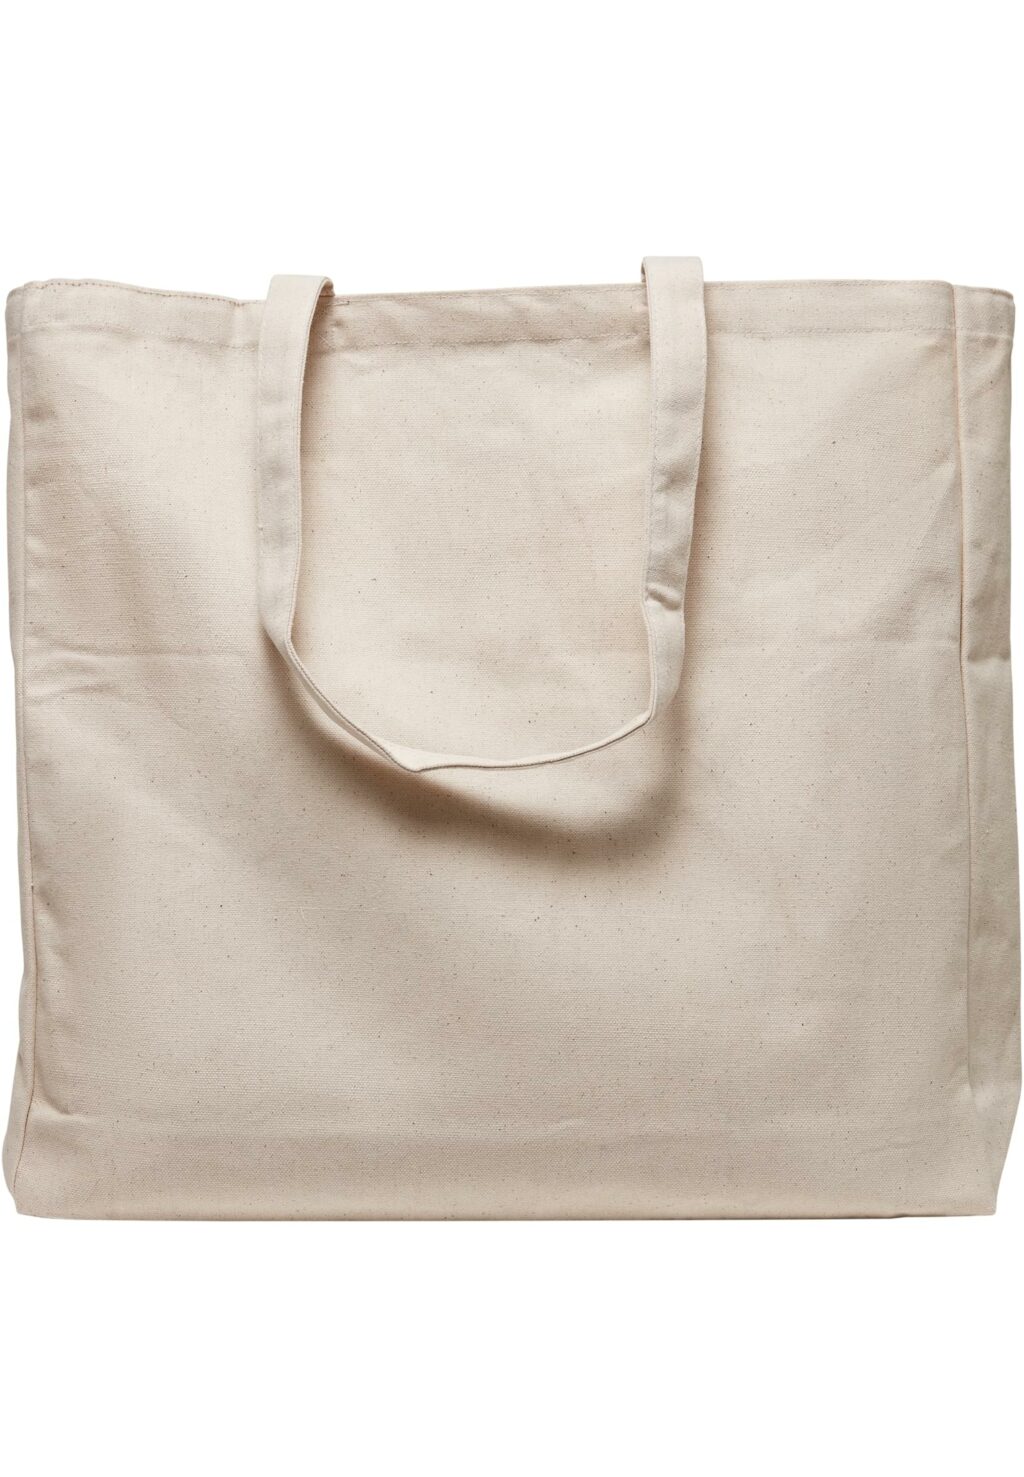 Wonderful Oversize Canvas Tote Bag offwhite one MT2284